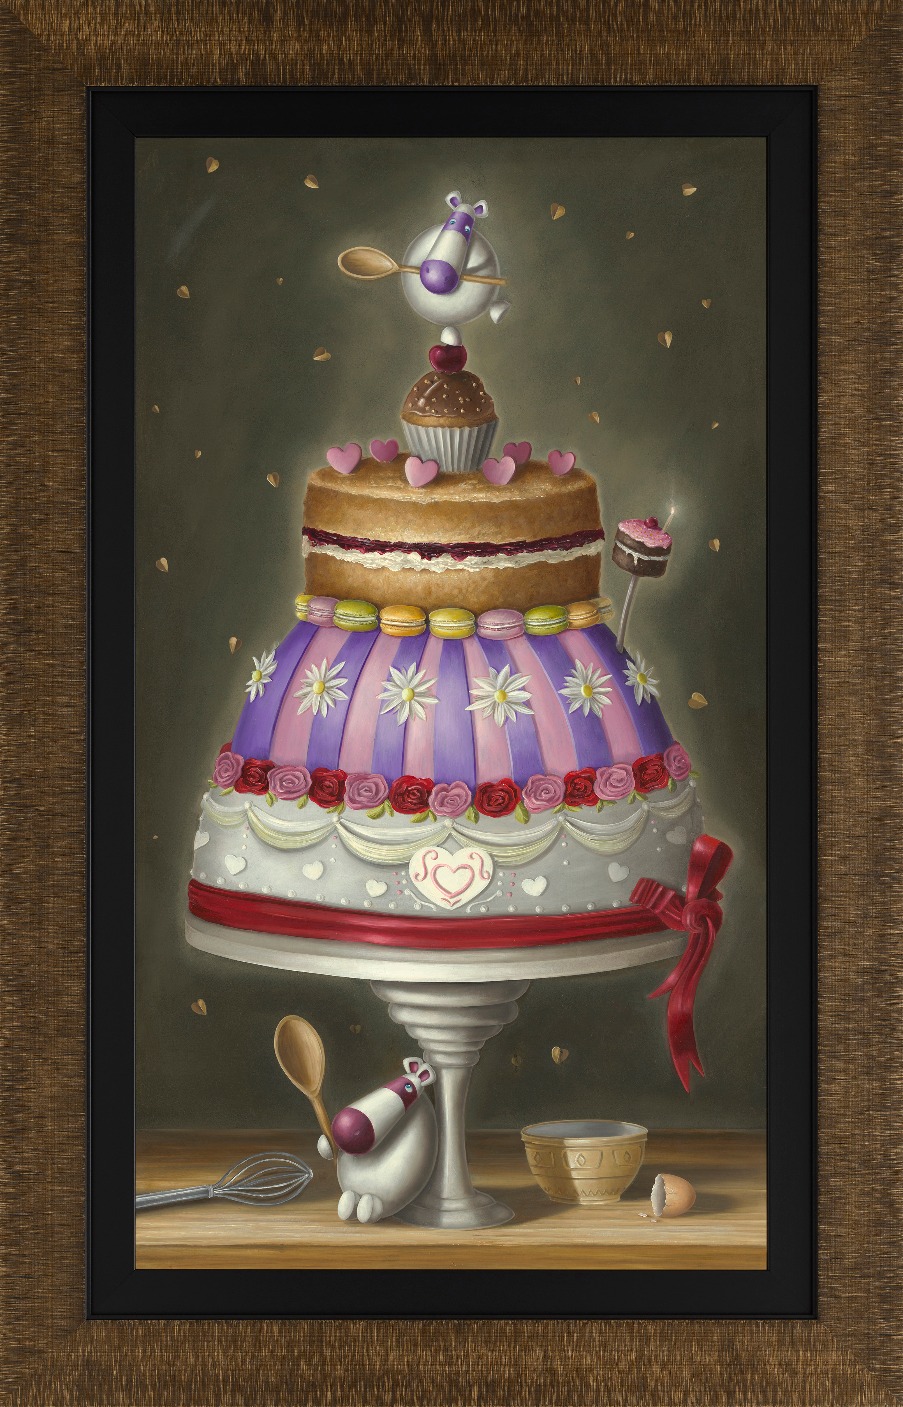 Bake Off by Peter Smith